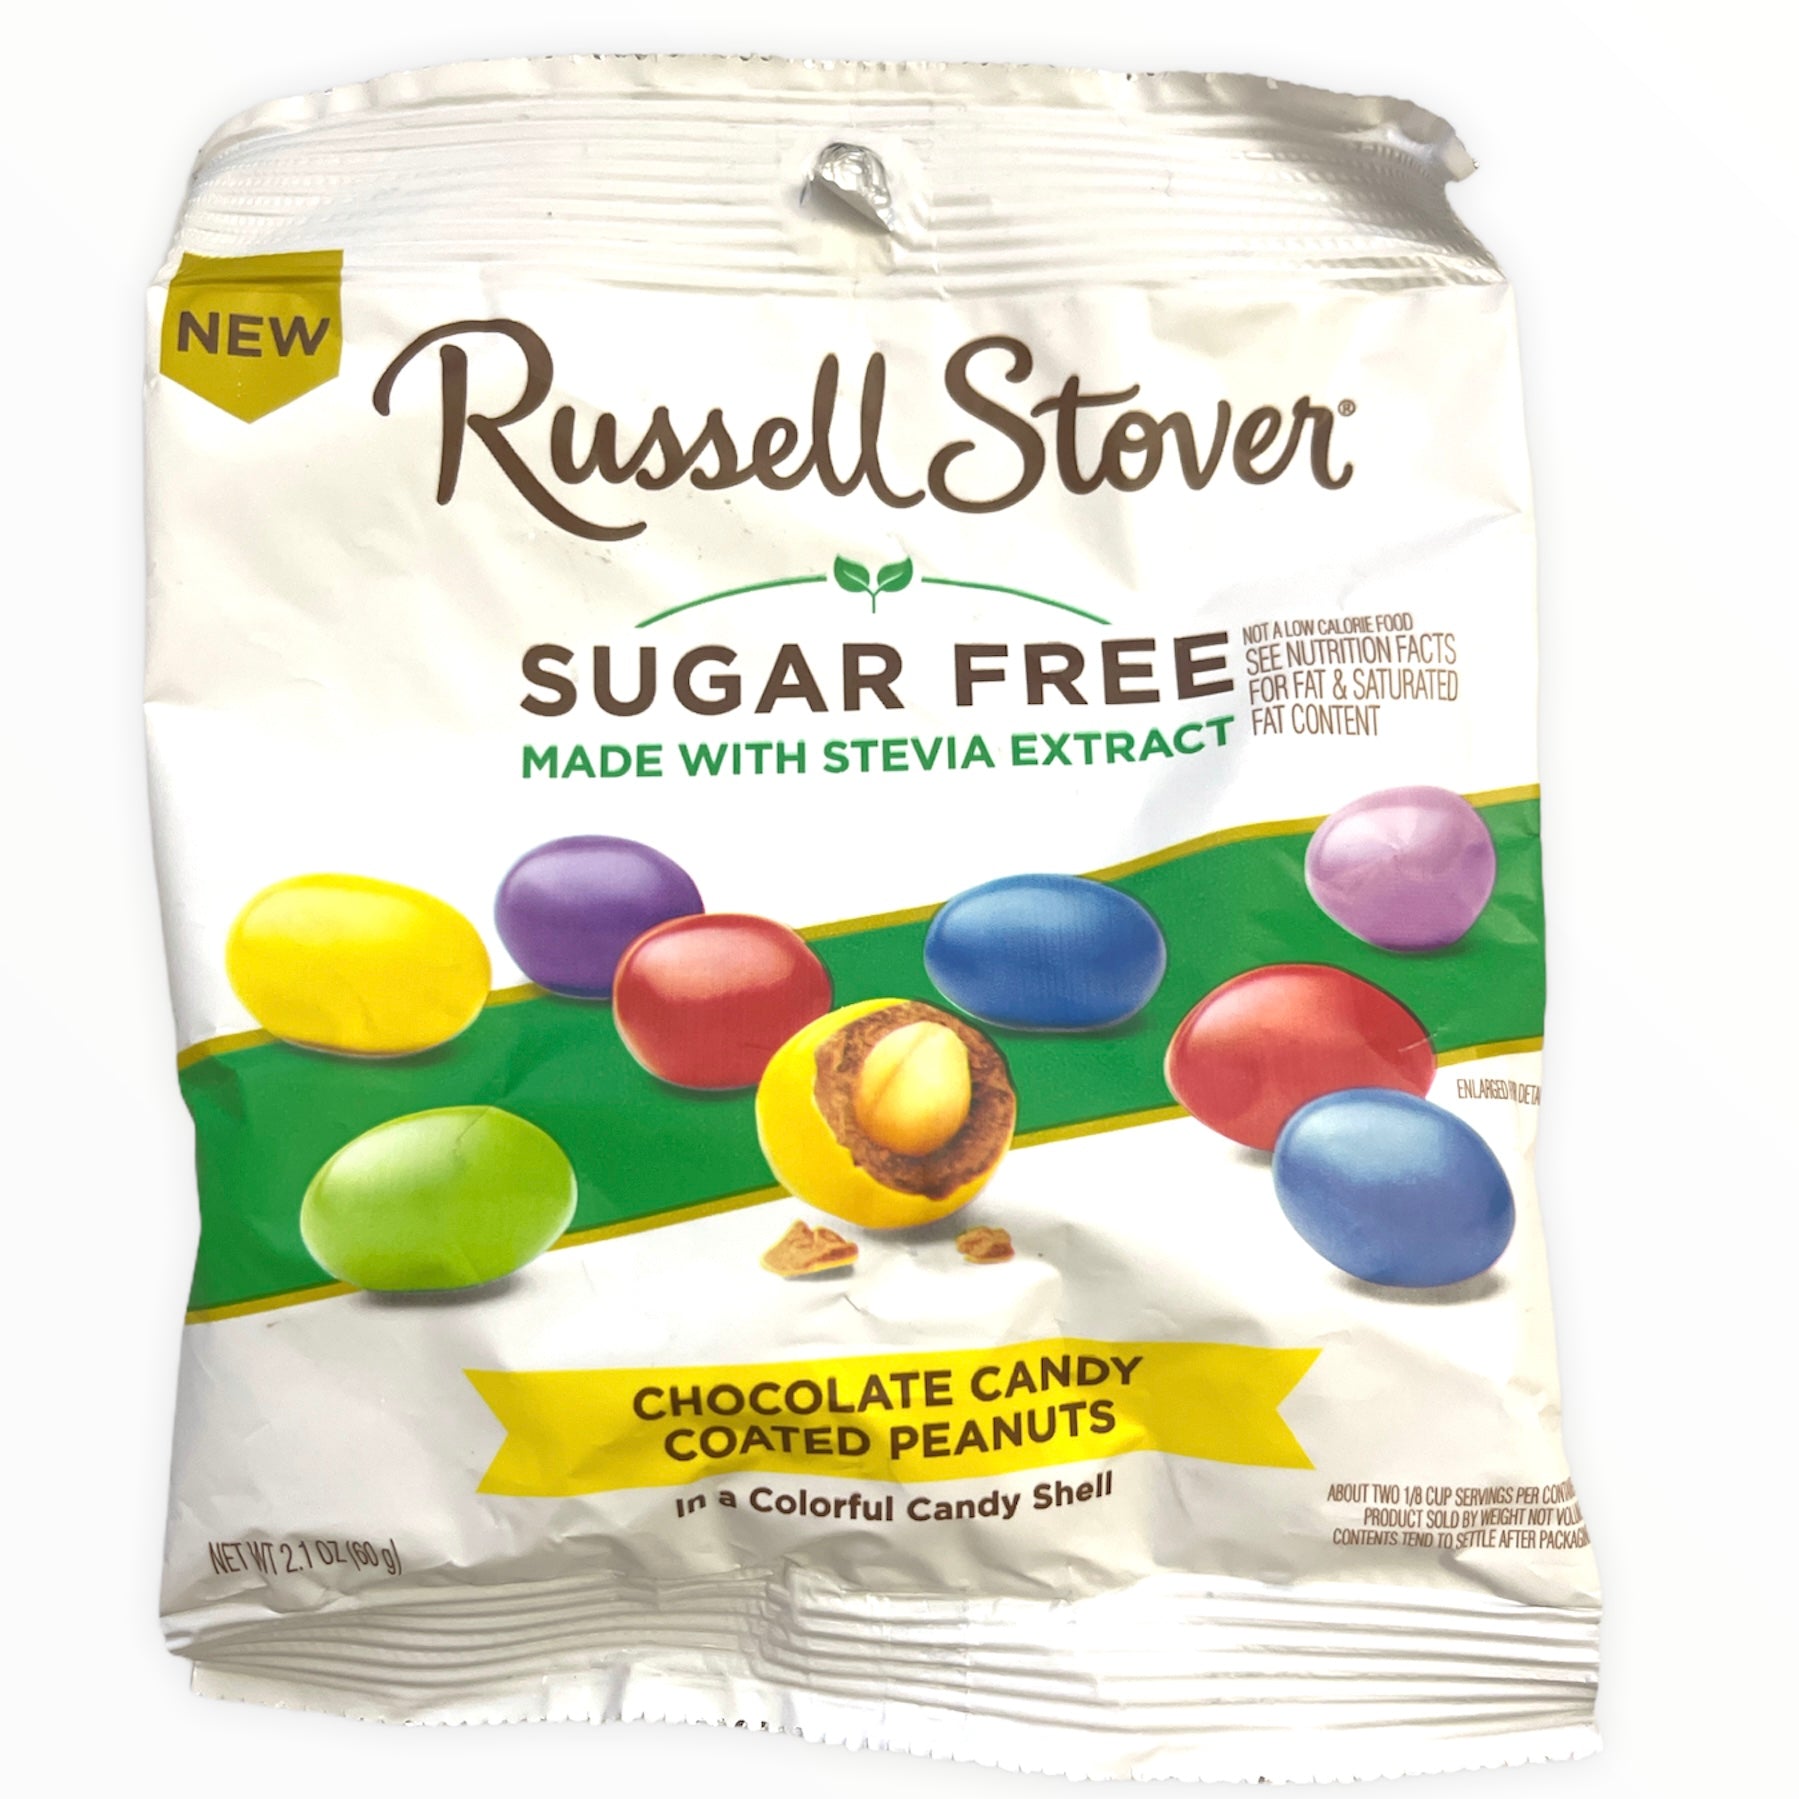 Russell Stover Sugar Free Chocolate Candy Coated Peanuts, 2.1oz